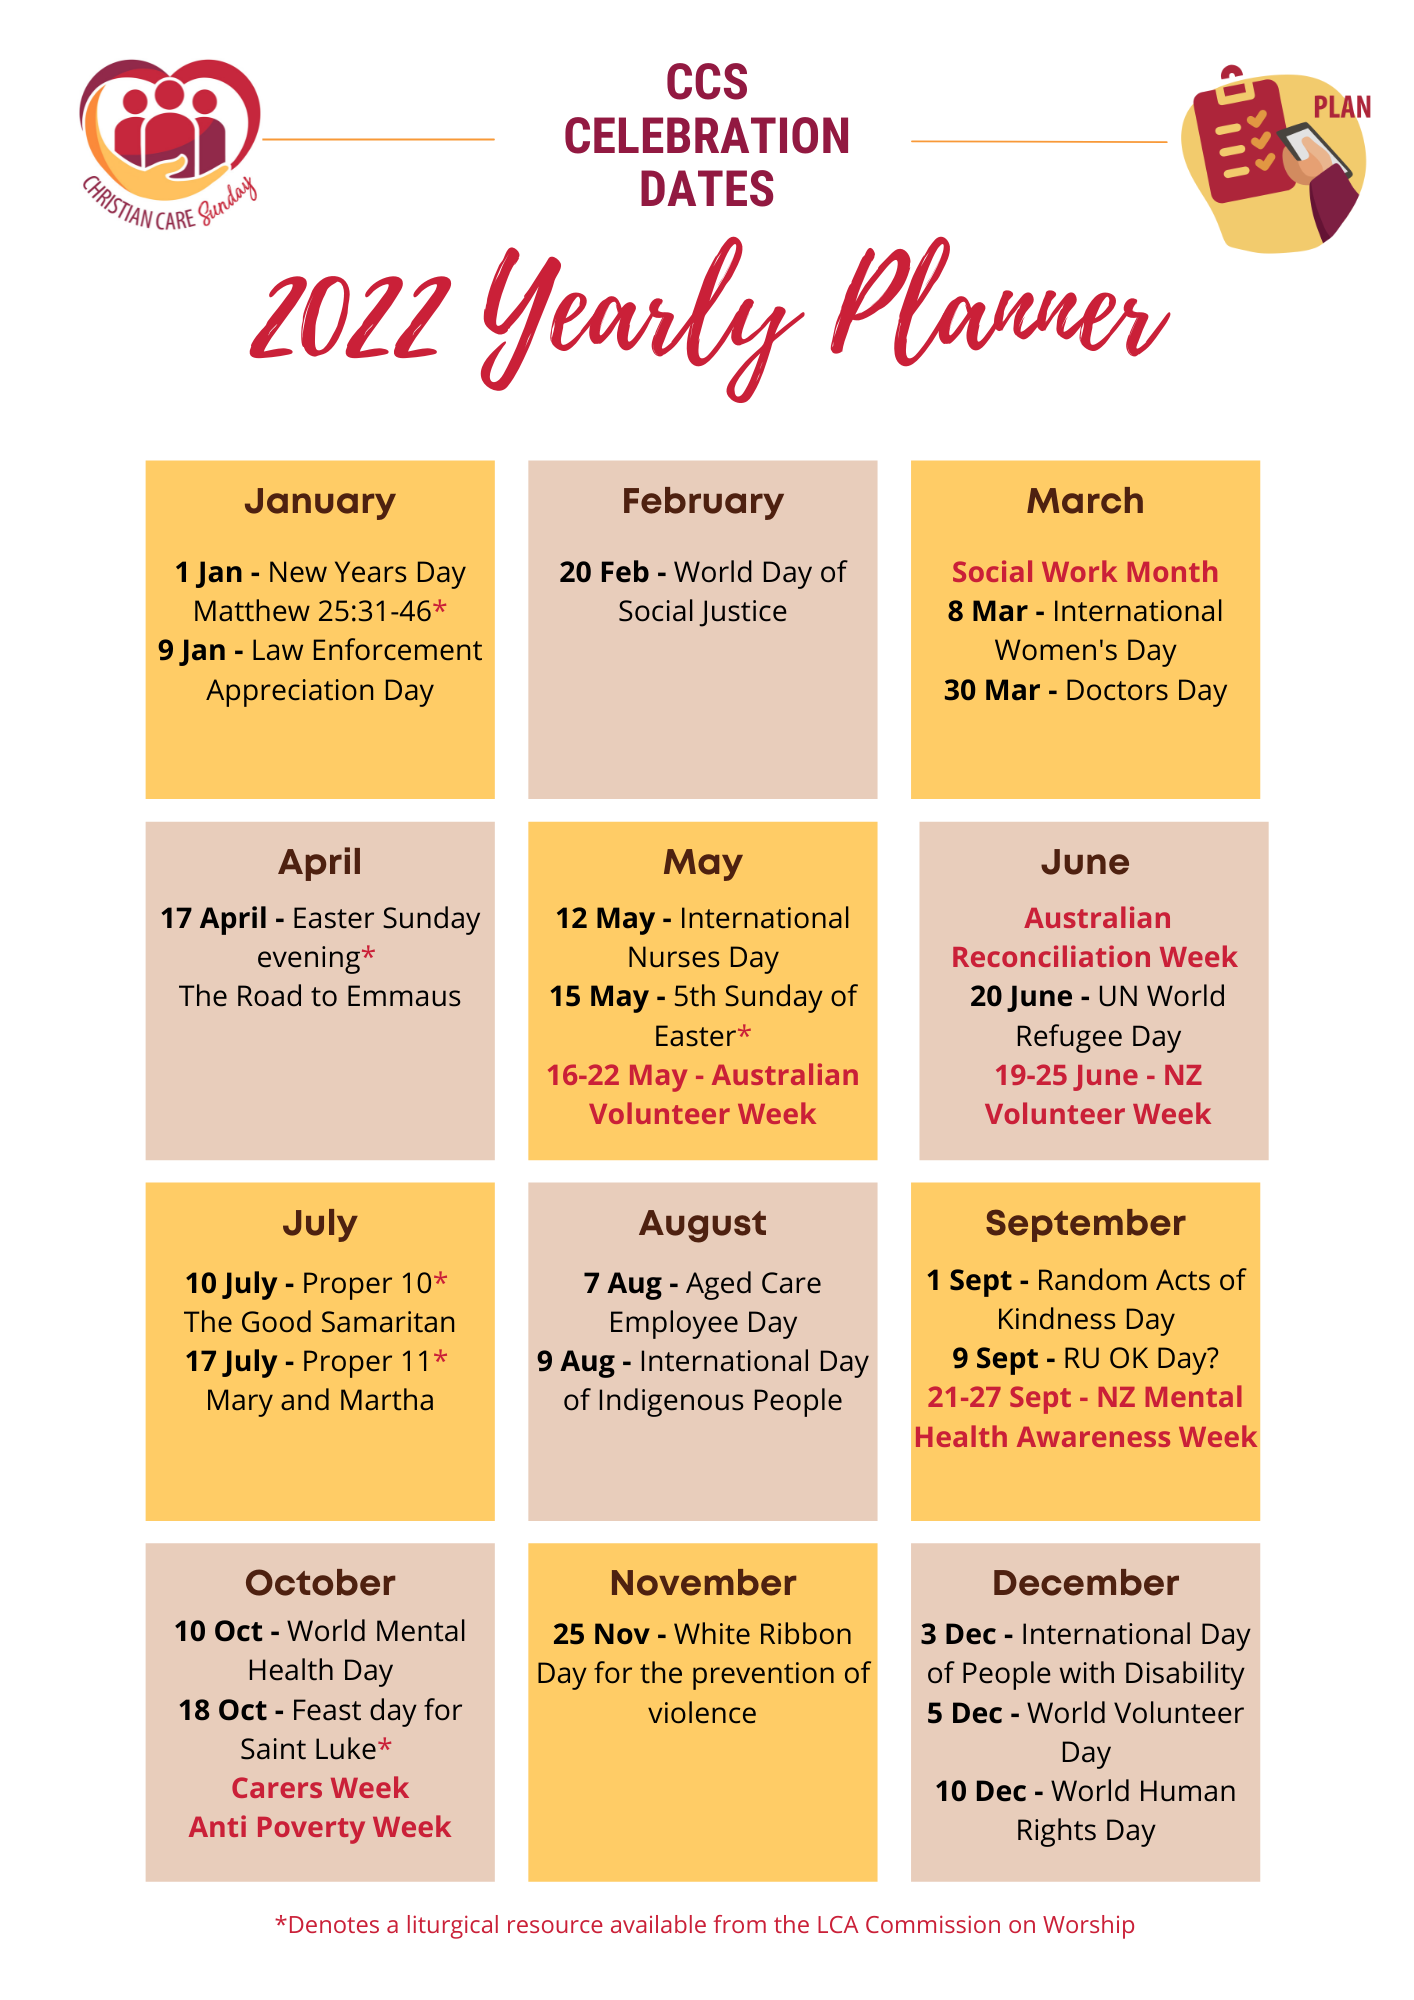 CCS 2022 Yearly Planner